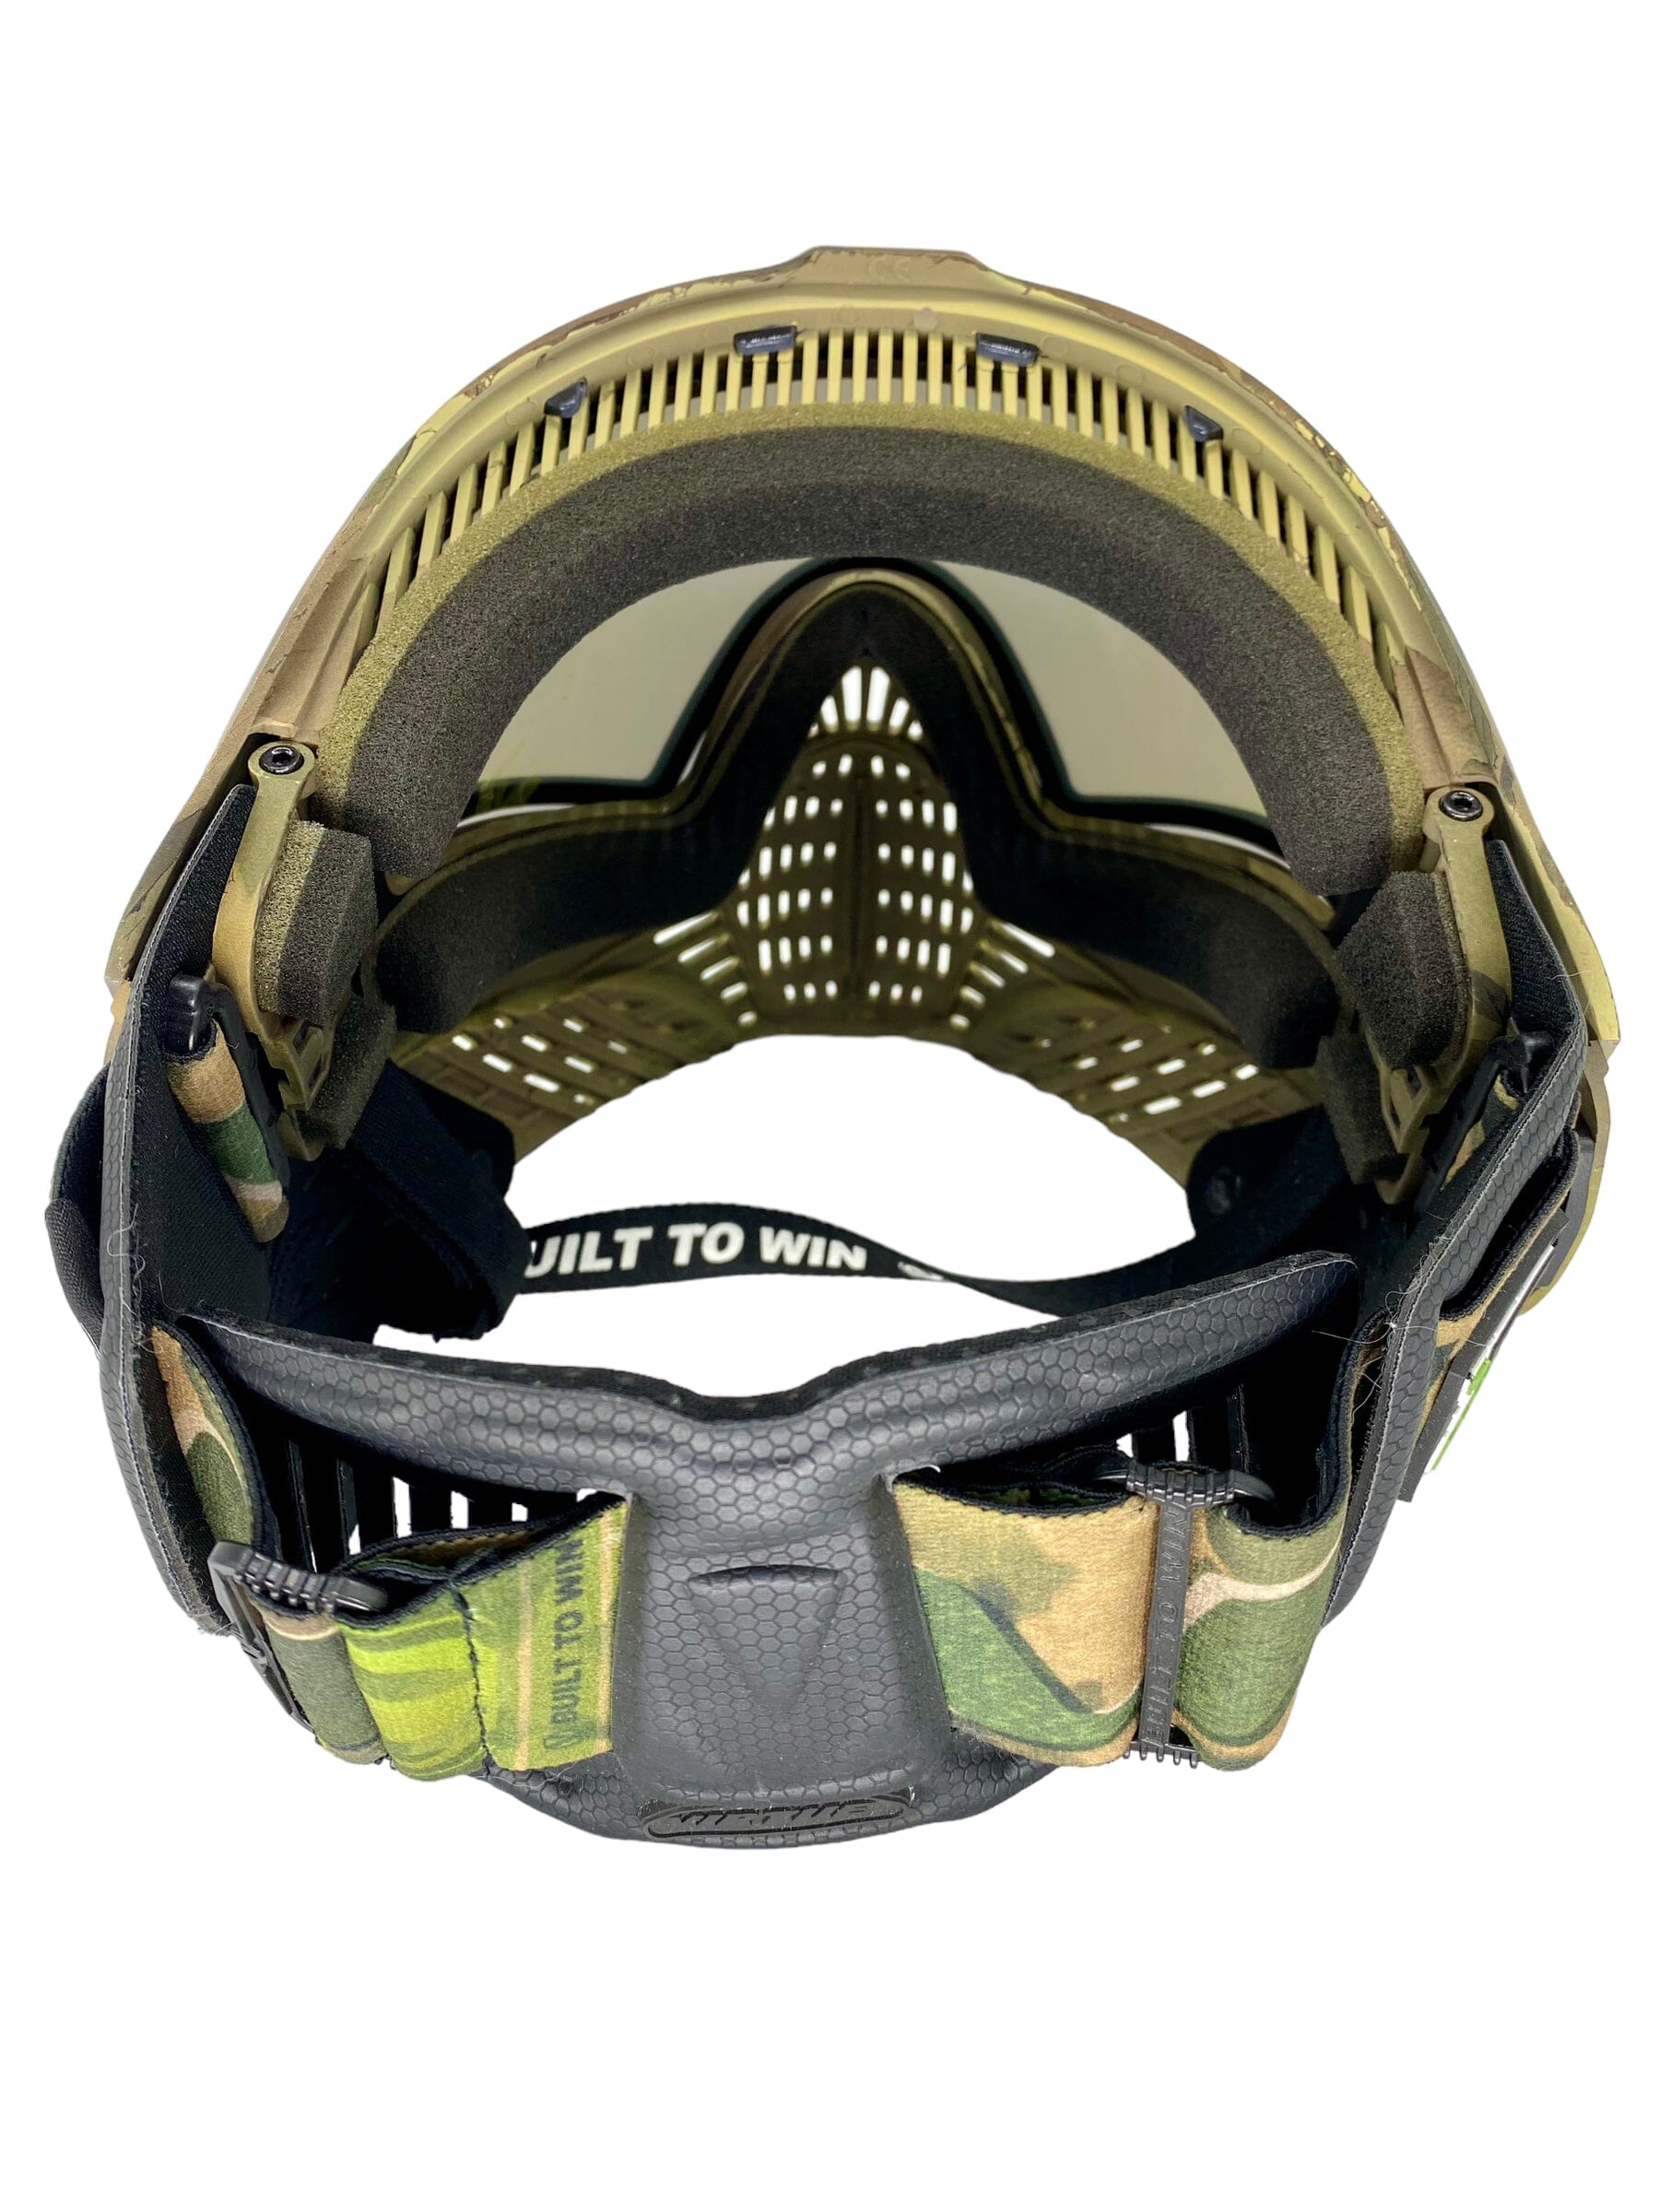 Used Virtue Paintball Mask Paintball Gun from CPXBrosPaintball Buy/Sell/Trade Paintball Markers, Paintball Hoppers, Paintball Masks, and Hormesis Headbands